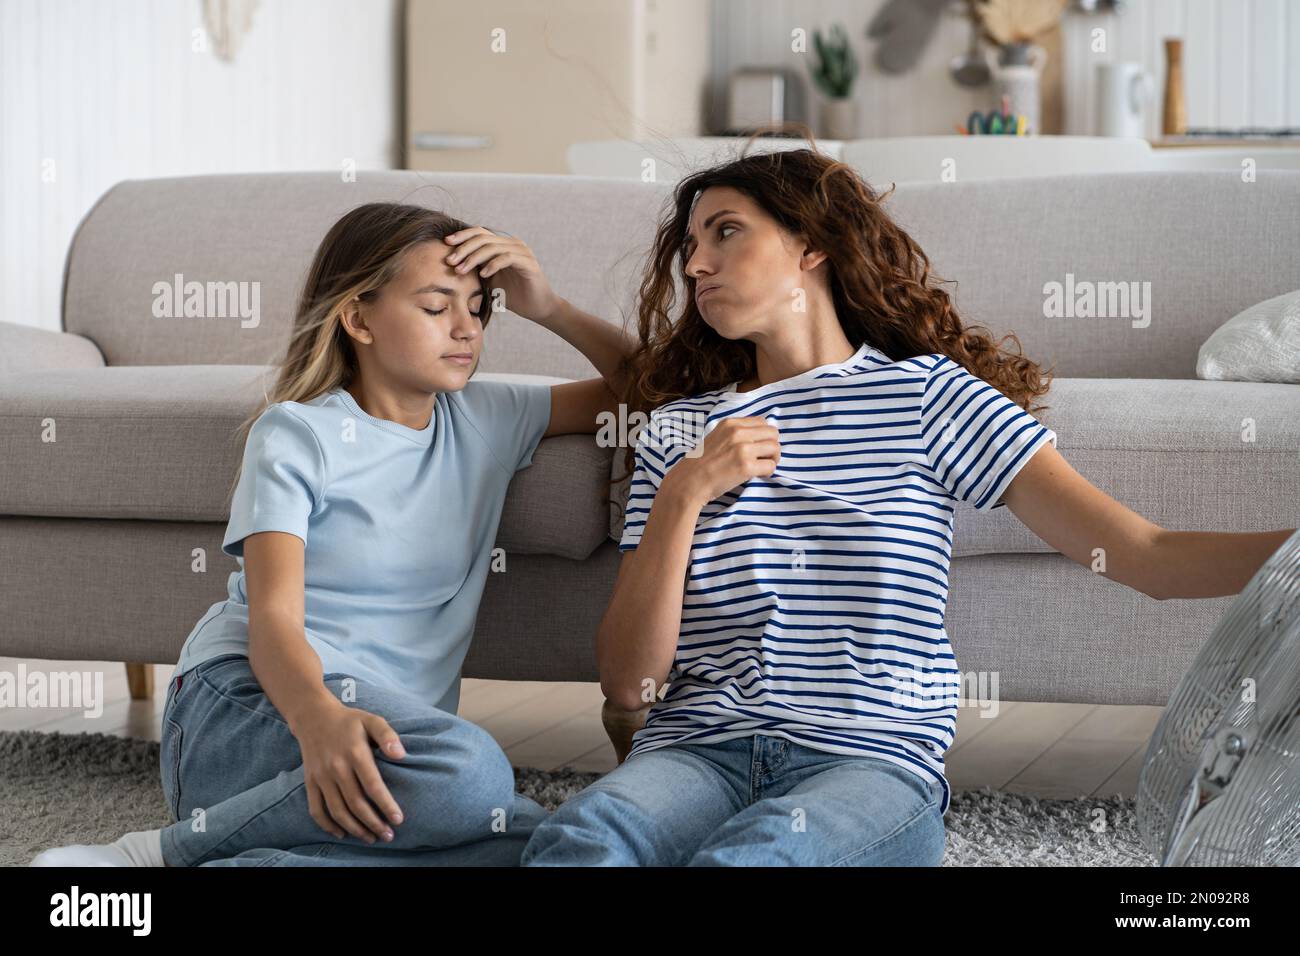 Sweaty tired woman sits on floor next to sofa and fan looking back at teenage girl after summer walk Stock Photo